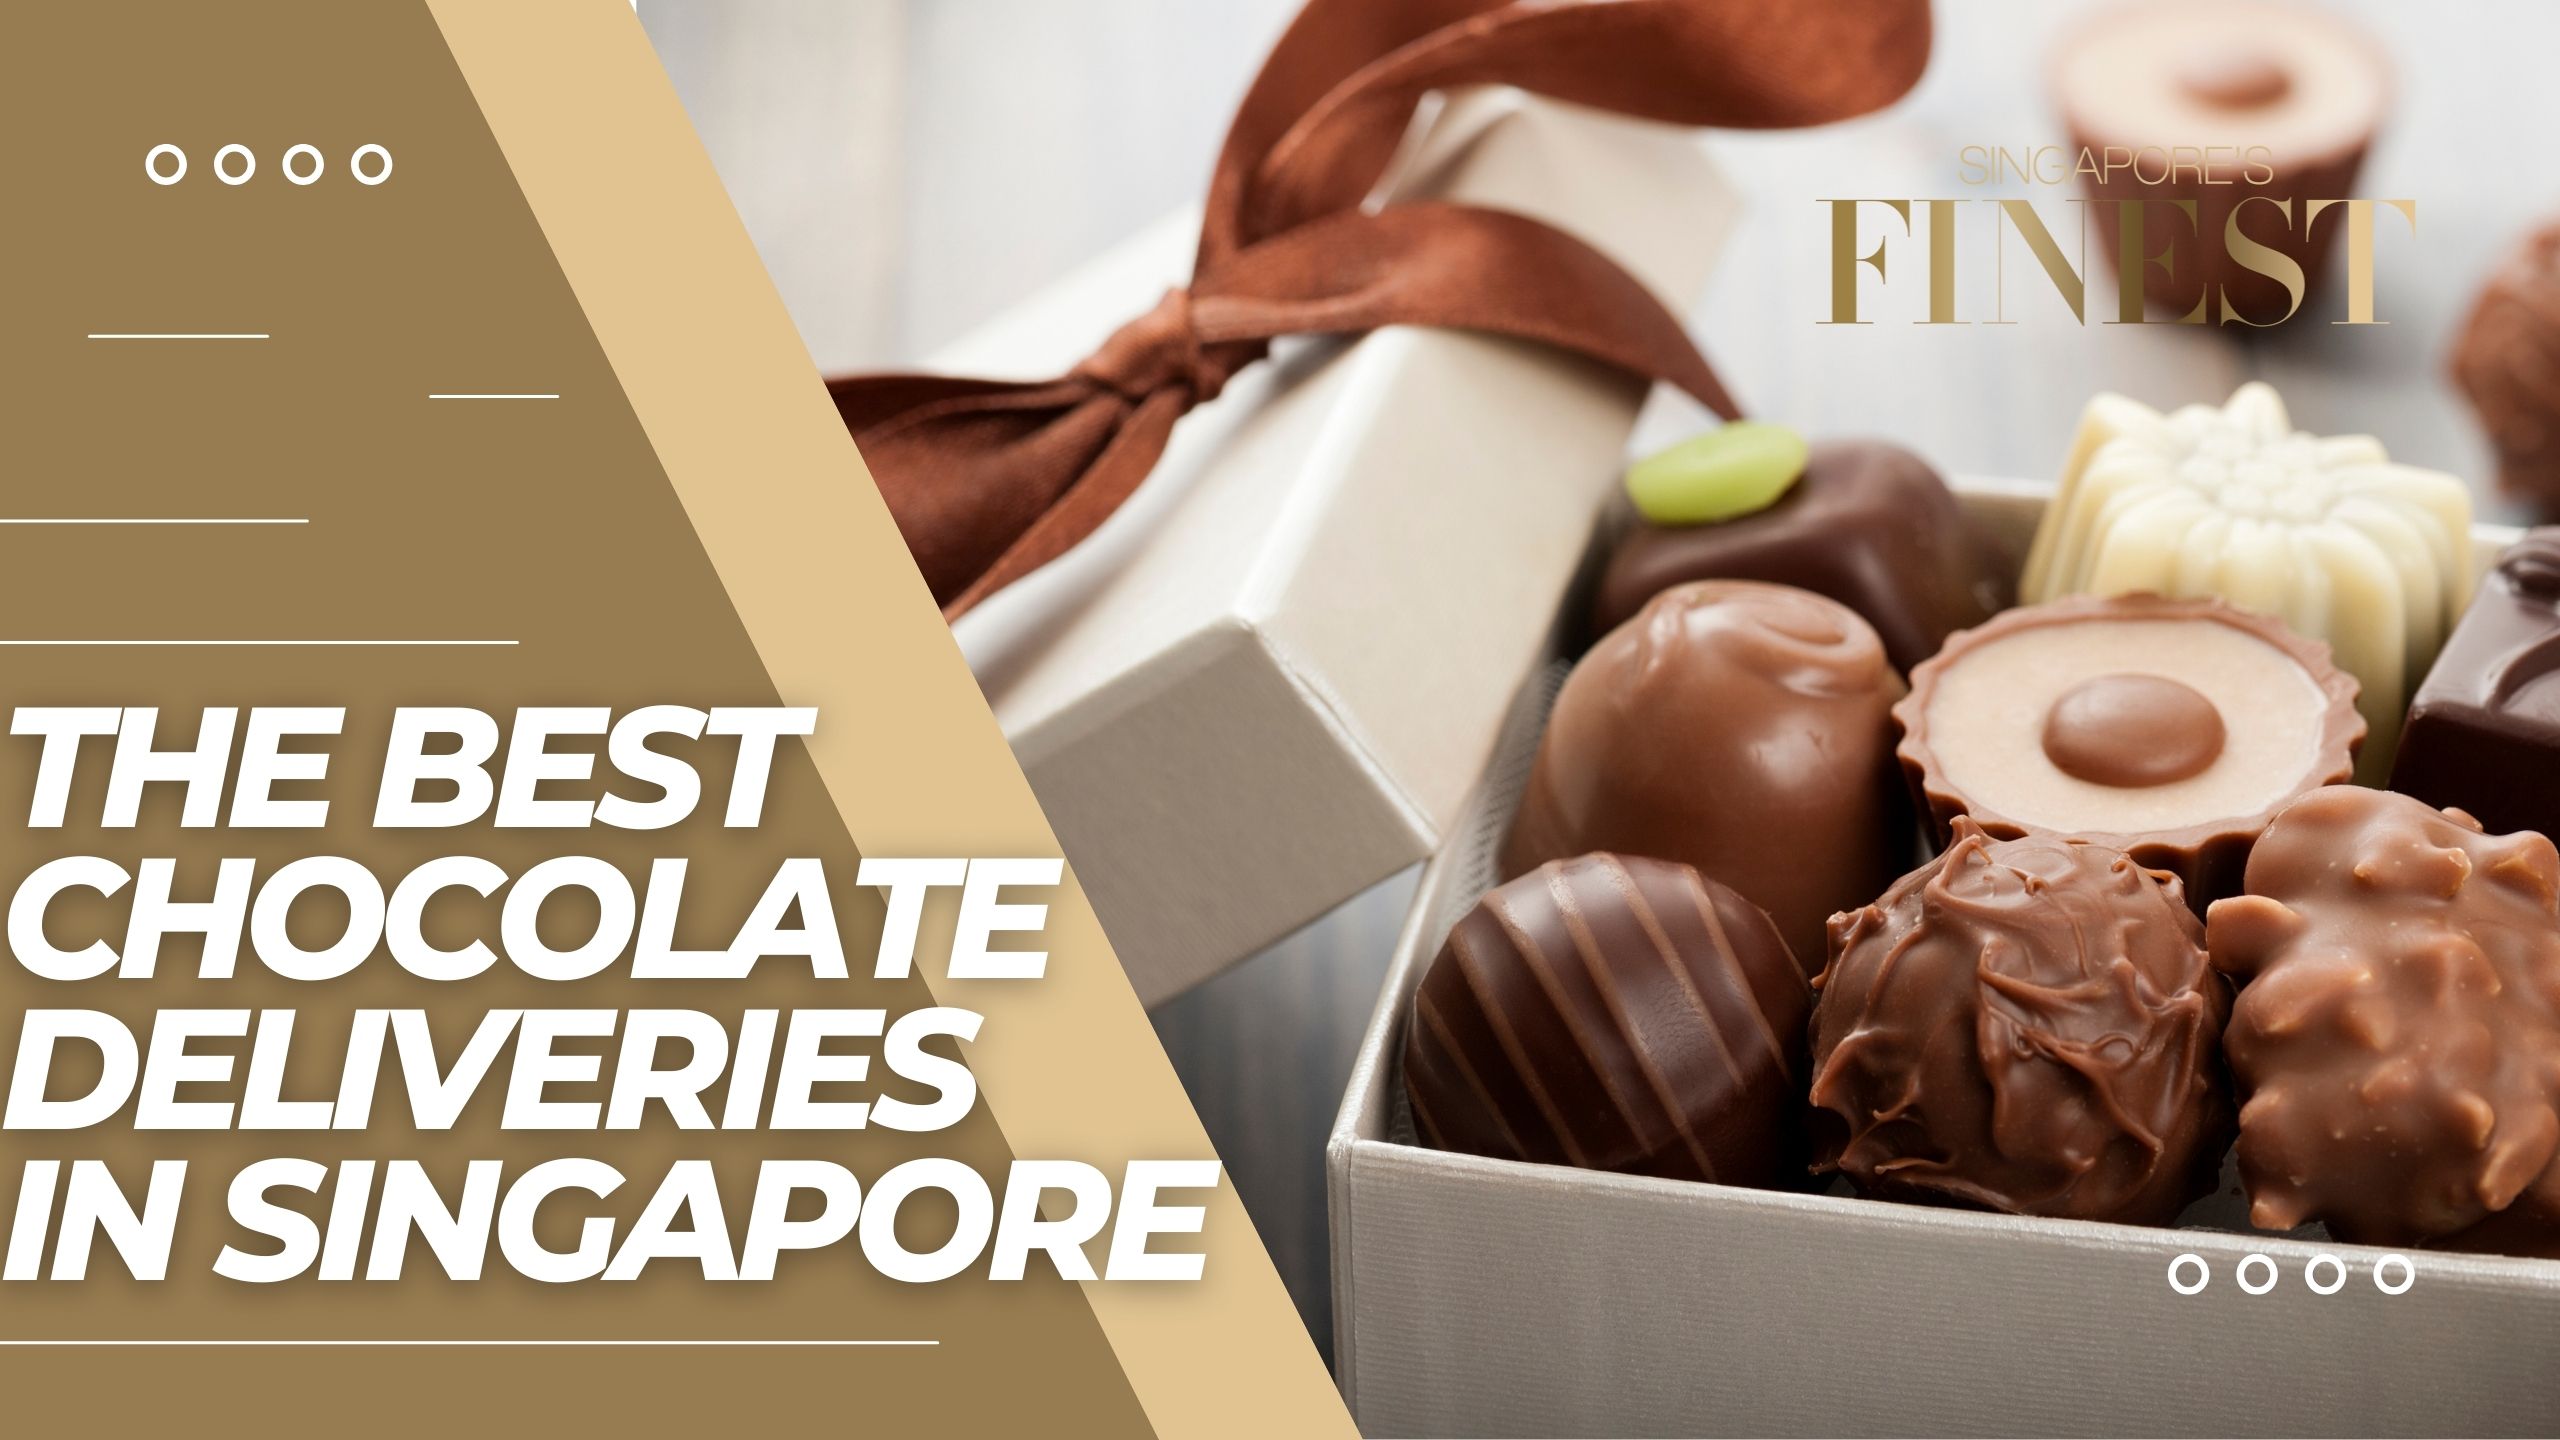 The Finest Chocolate Deliveries in Singapore